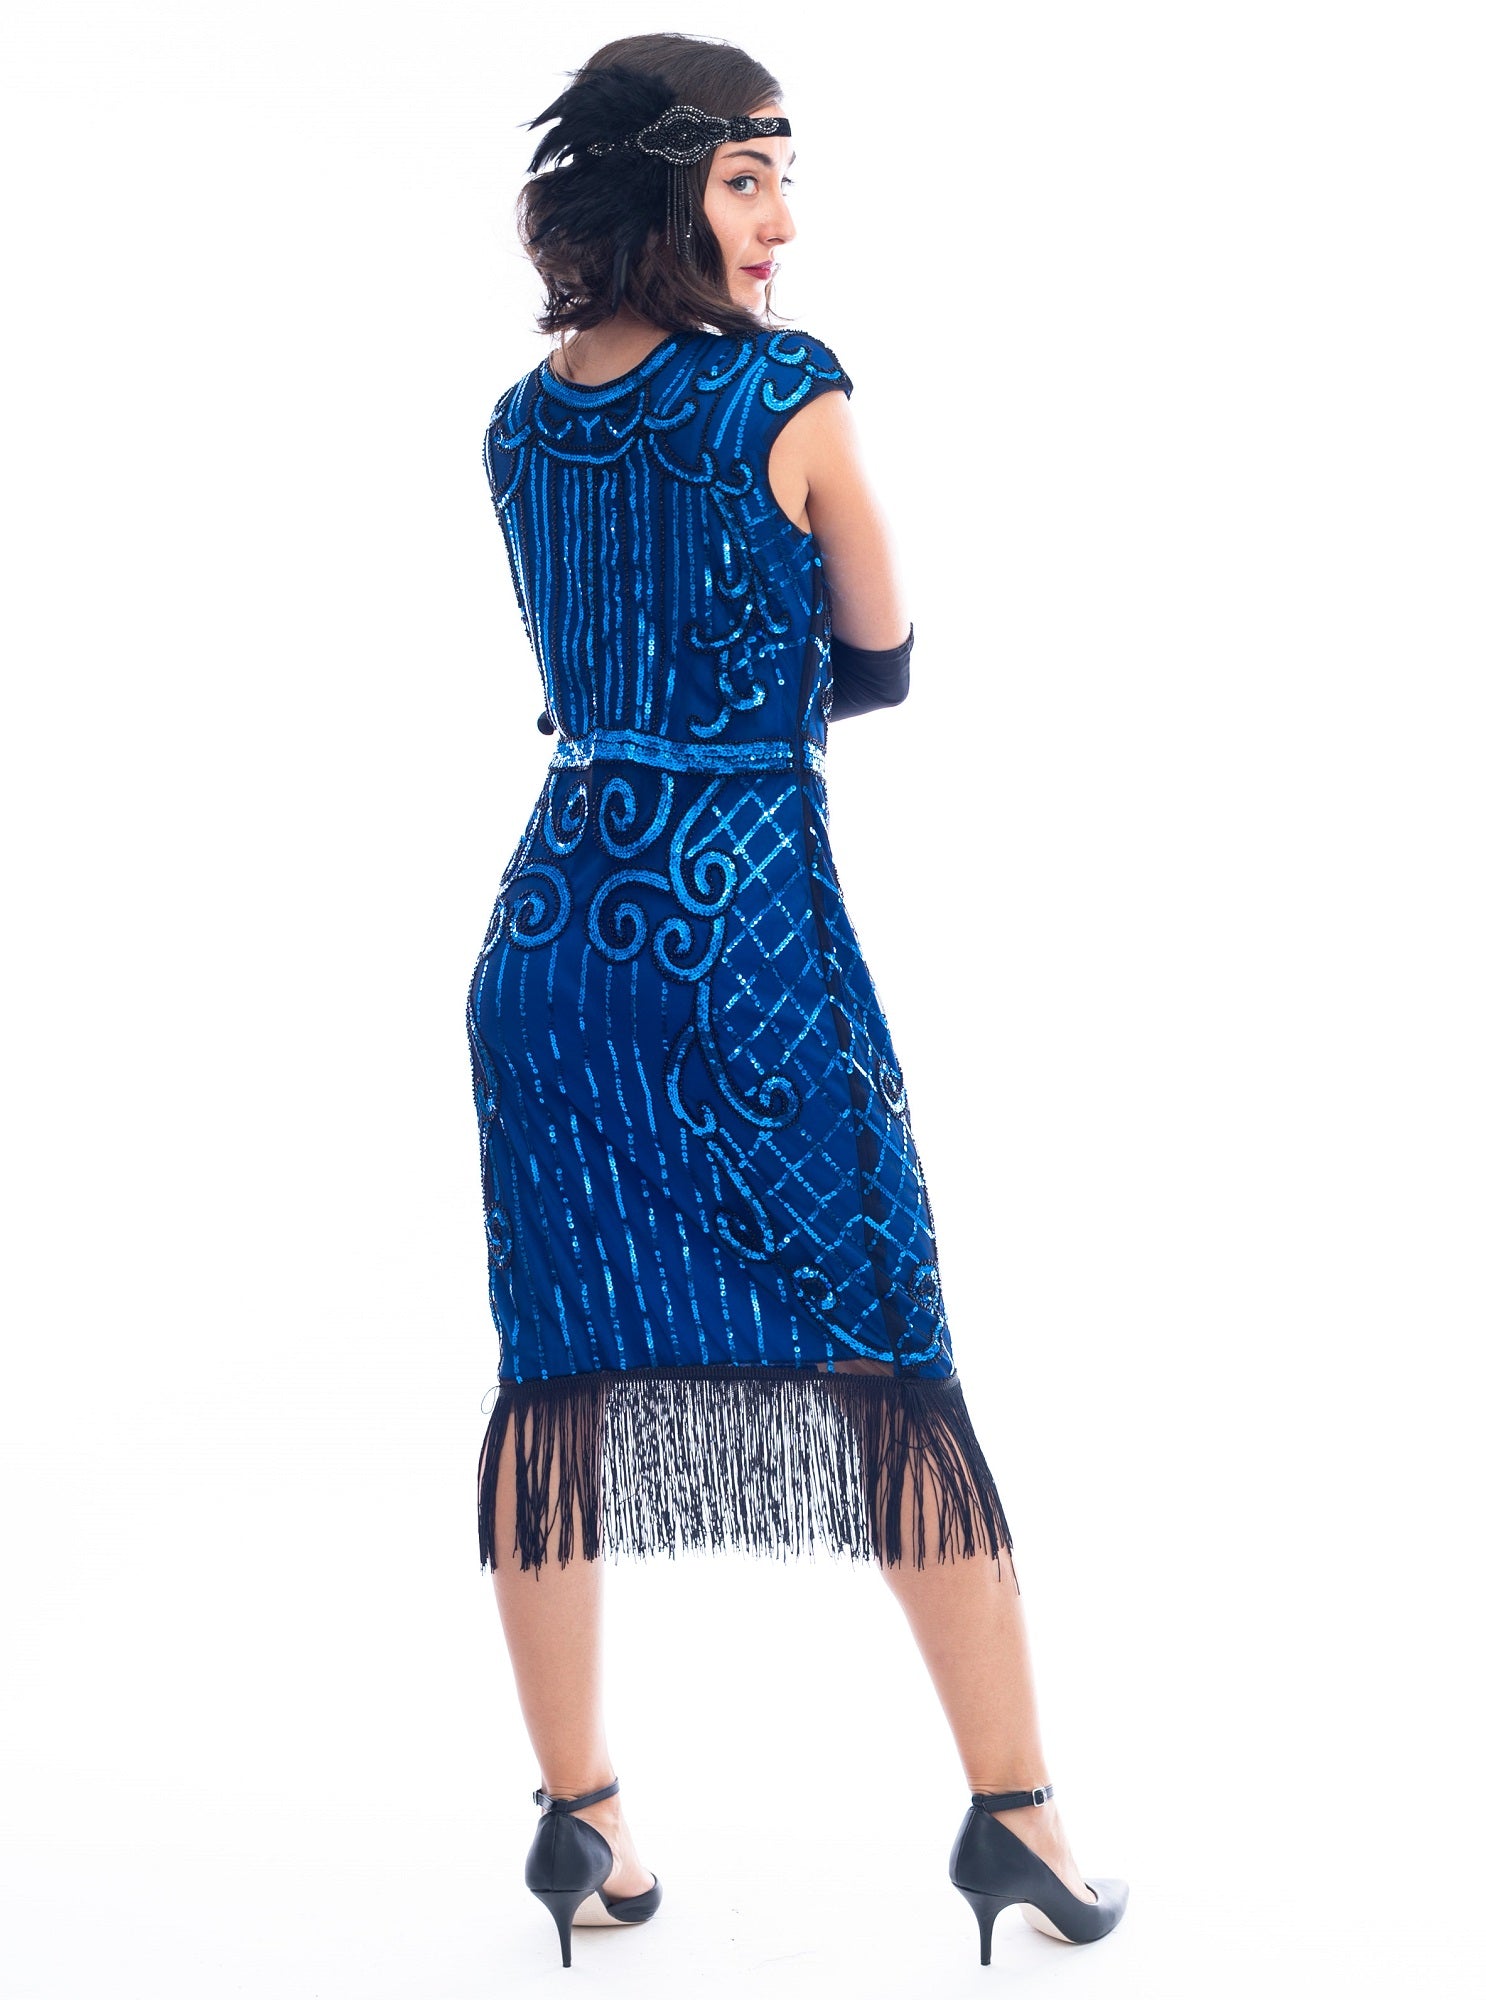 A back view 1920s Blue Flapper Dress with blue sequins, black beads and fringes around hem